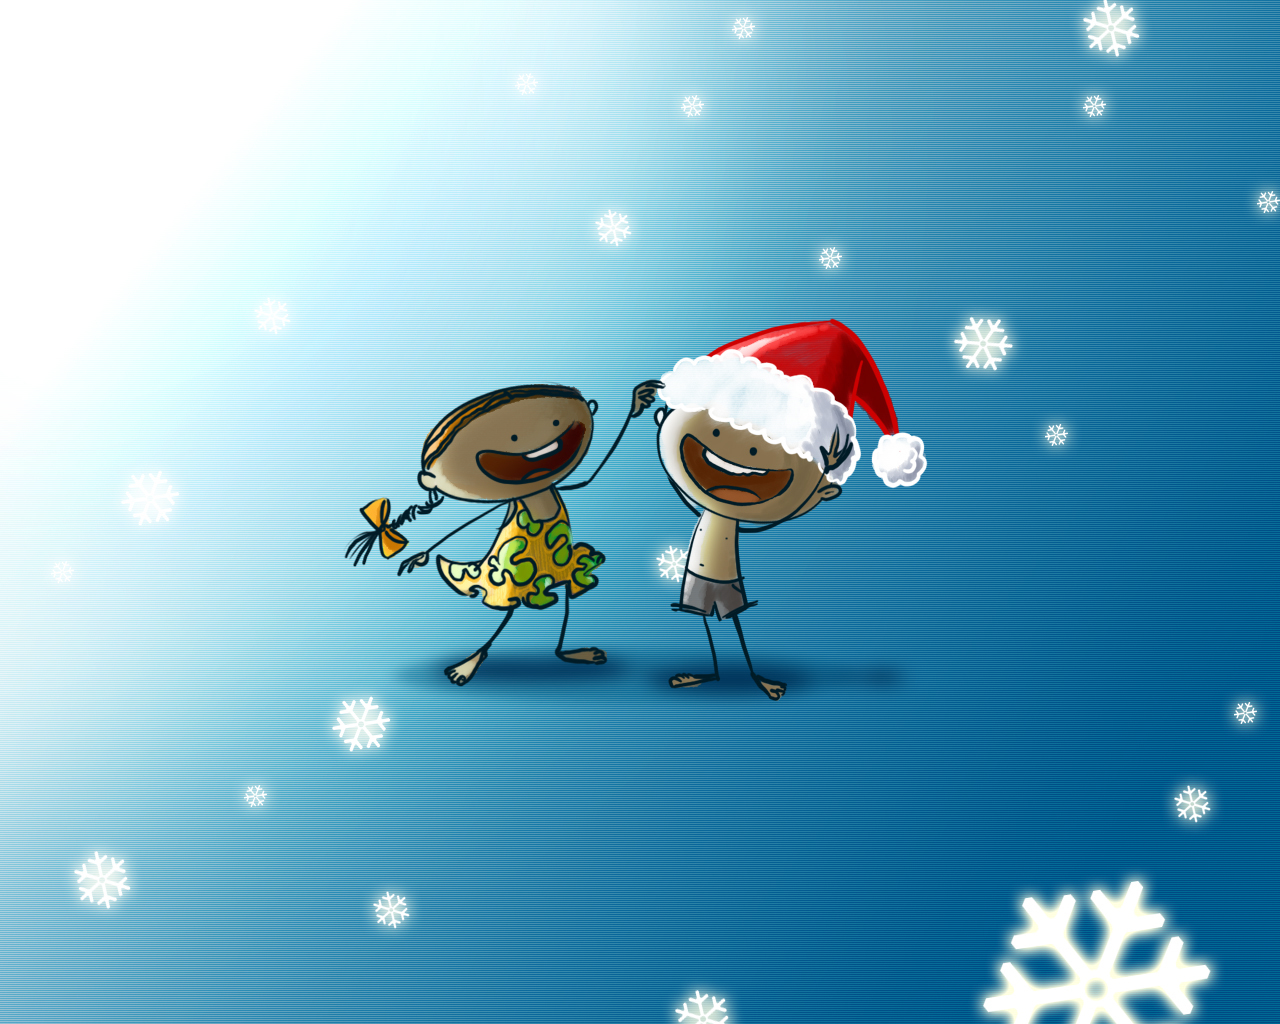 children, pictures, funny, holidays, new year, christmas xmas, turquoise